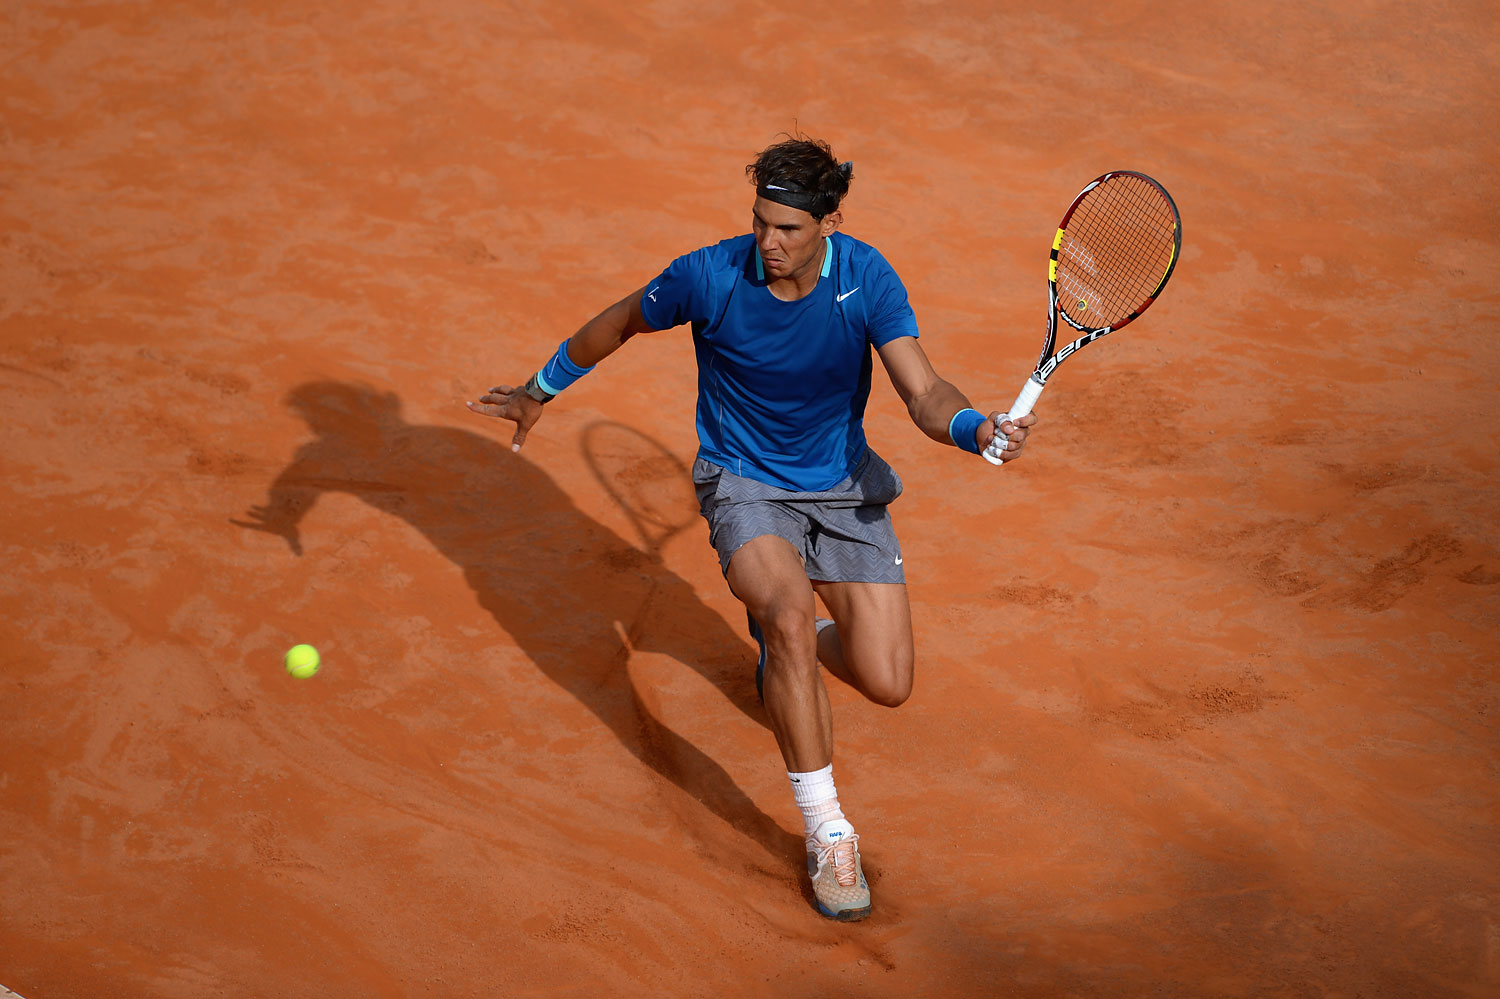 Rafael Nadal of Spain in action against Mikhail Youzhny of Russia during day 5 of the Internazionali BNL d'Italia 2014 on May 15, 2014 in Rome. (Michael Regan—Getty Images)